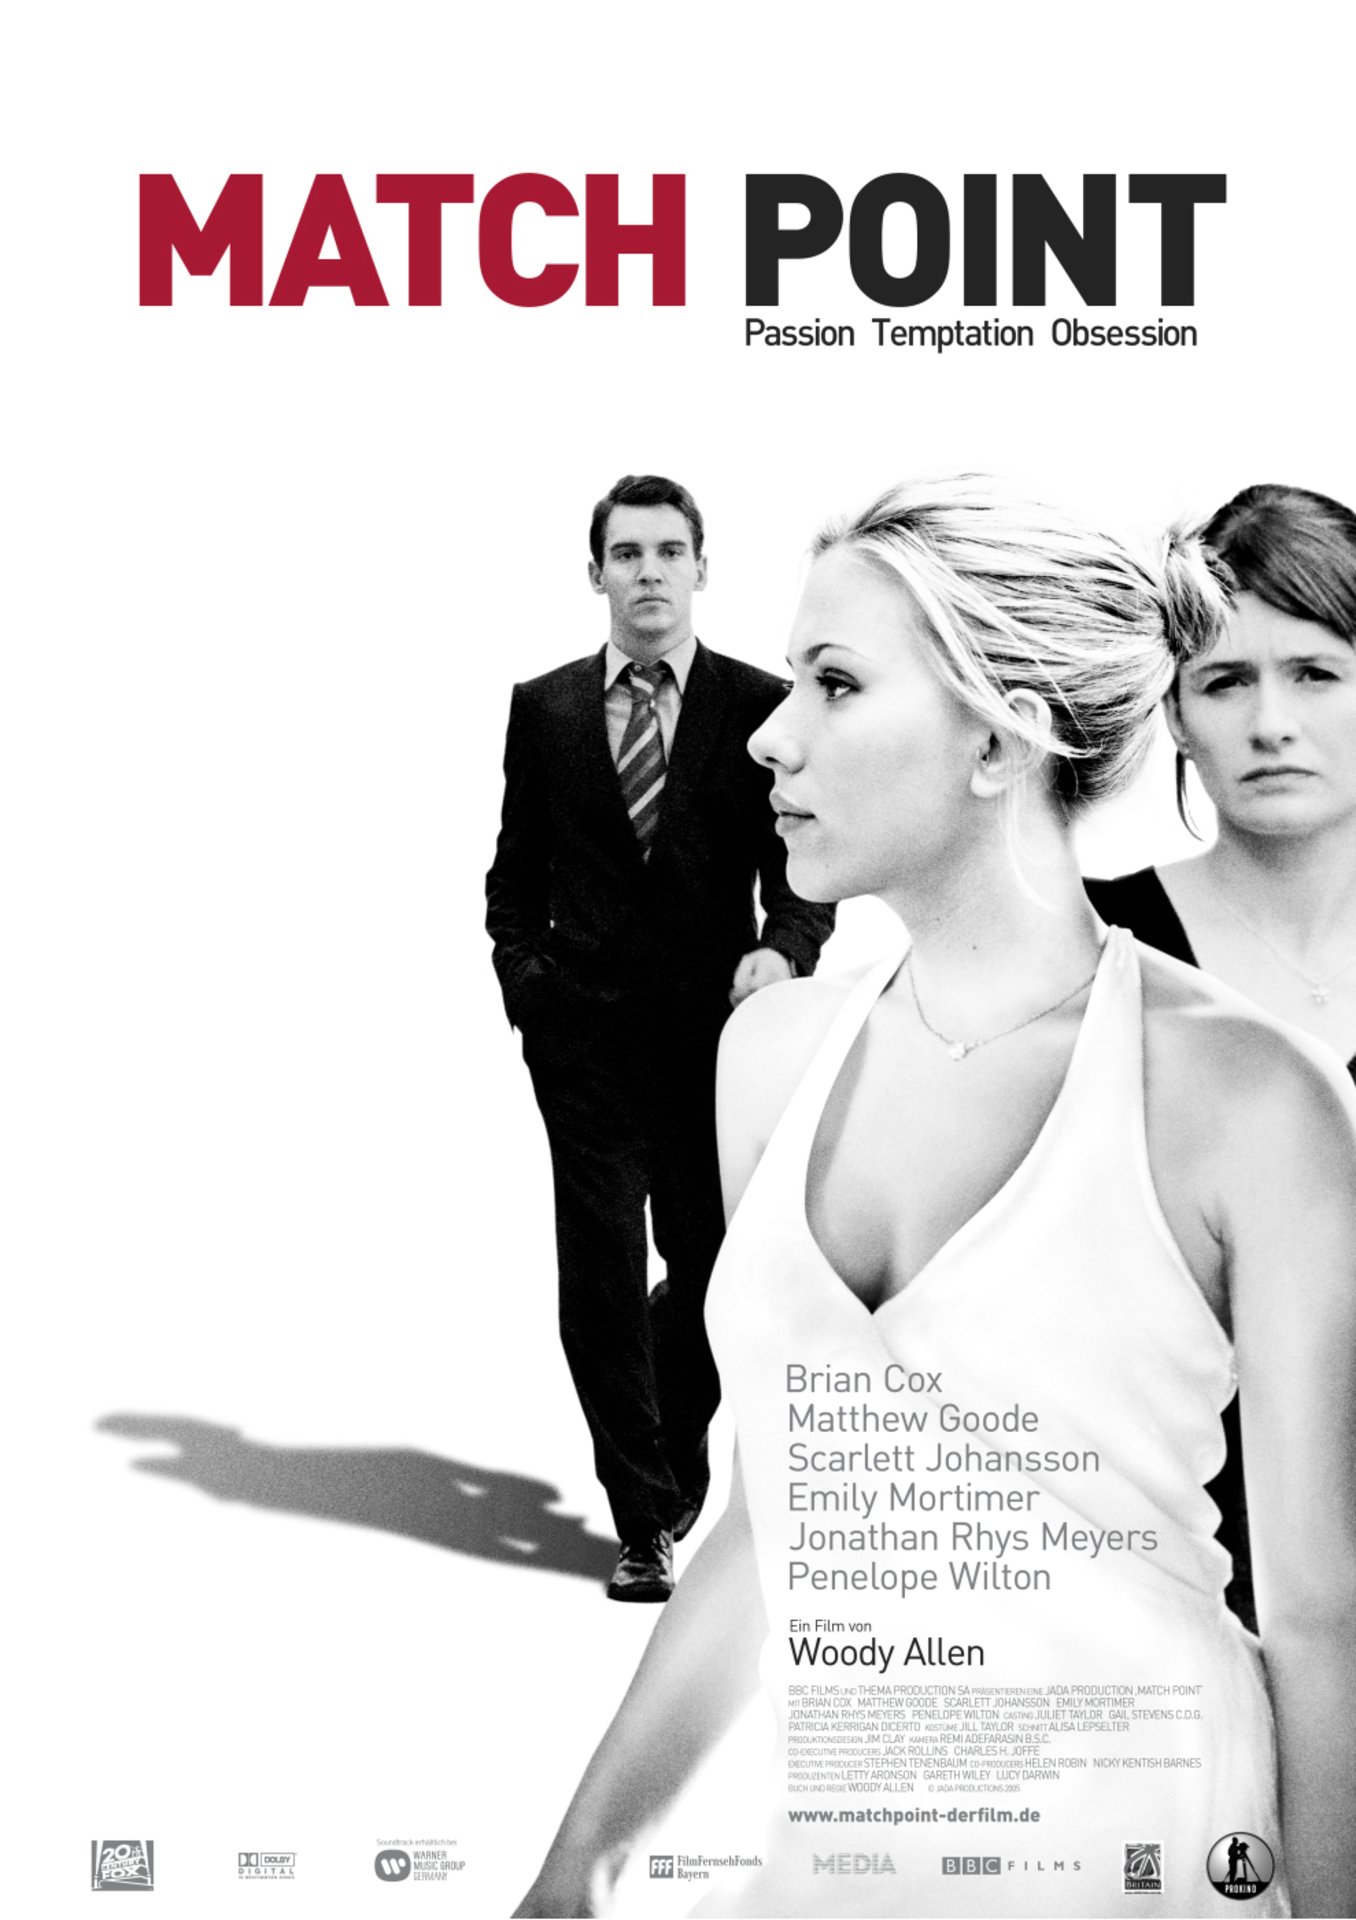 Match Point Tennis movie for COVID-19